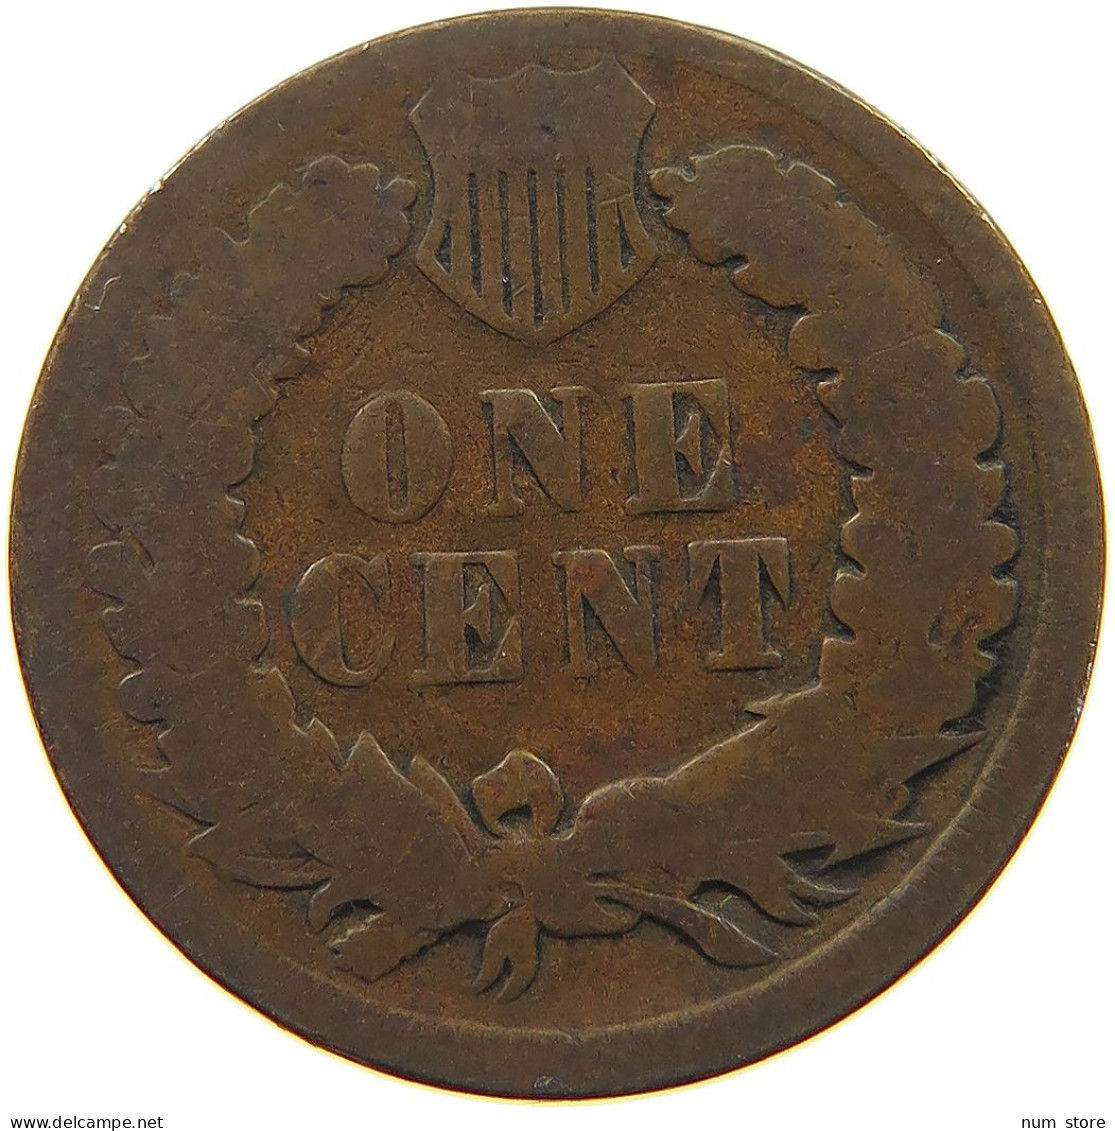 UNITED STATES OF AMERICA CENT 1891 INDIAN HEAD #a050 0483 - 1859-1909: Indian Head